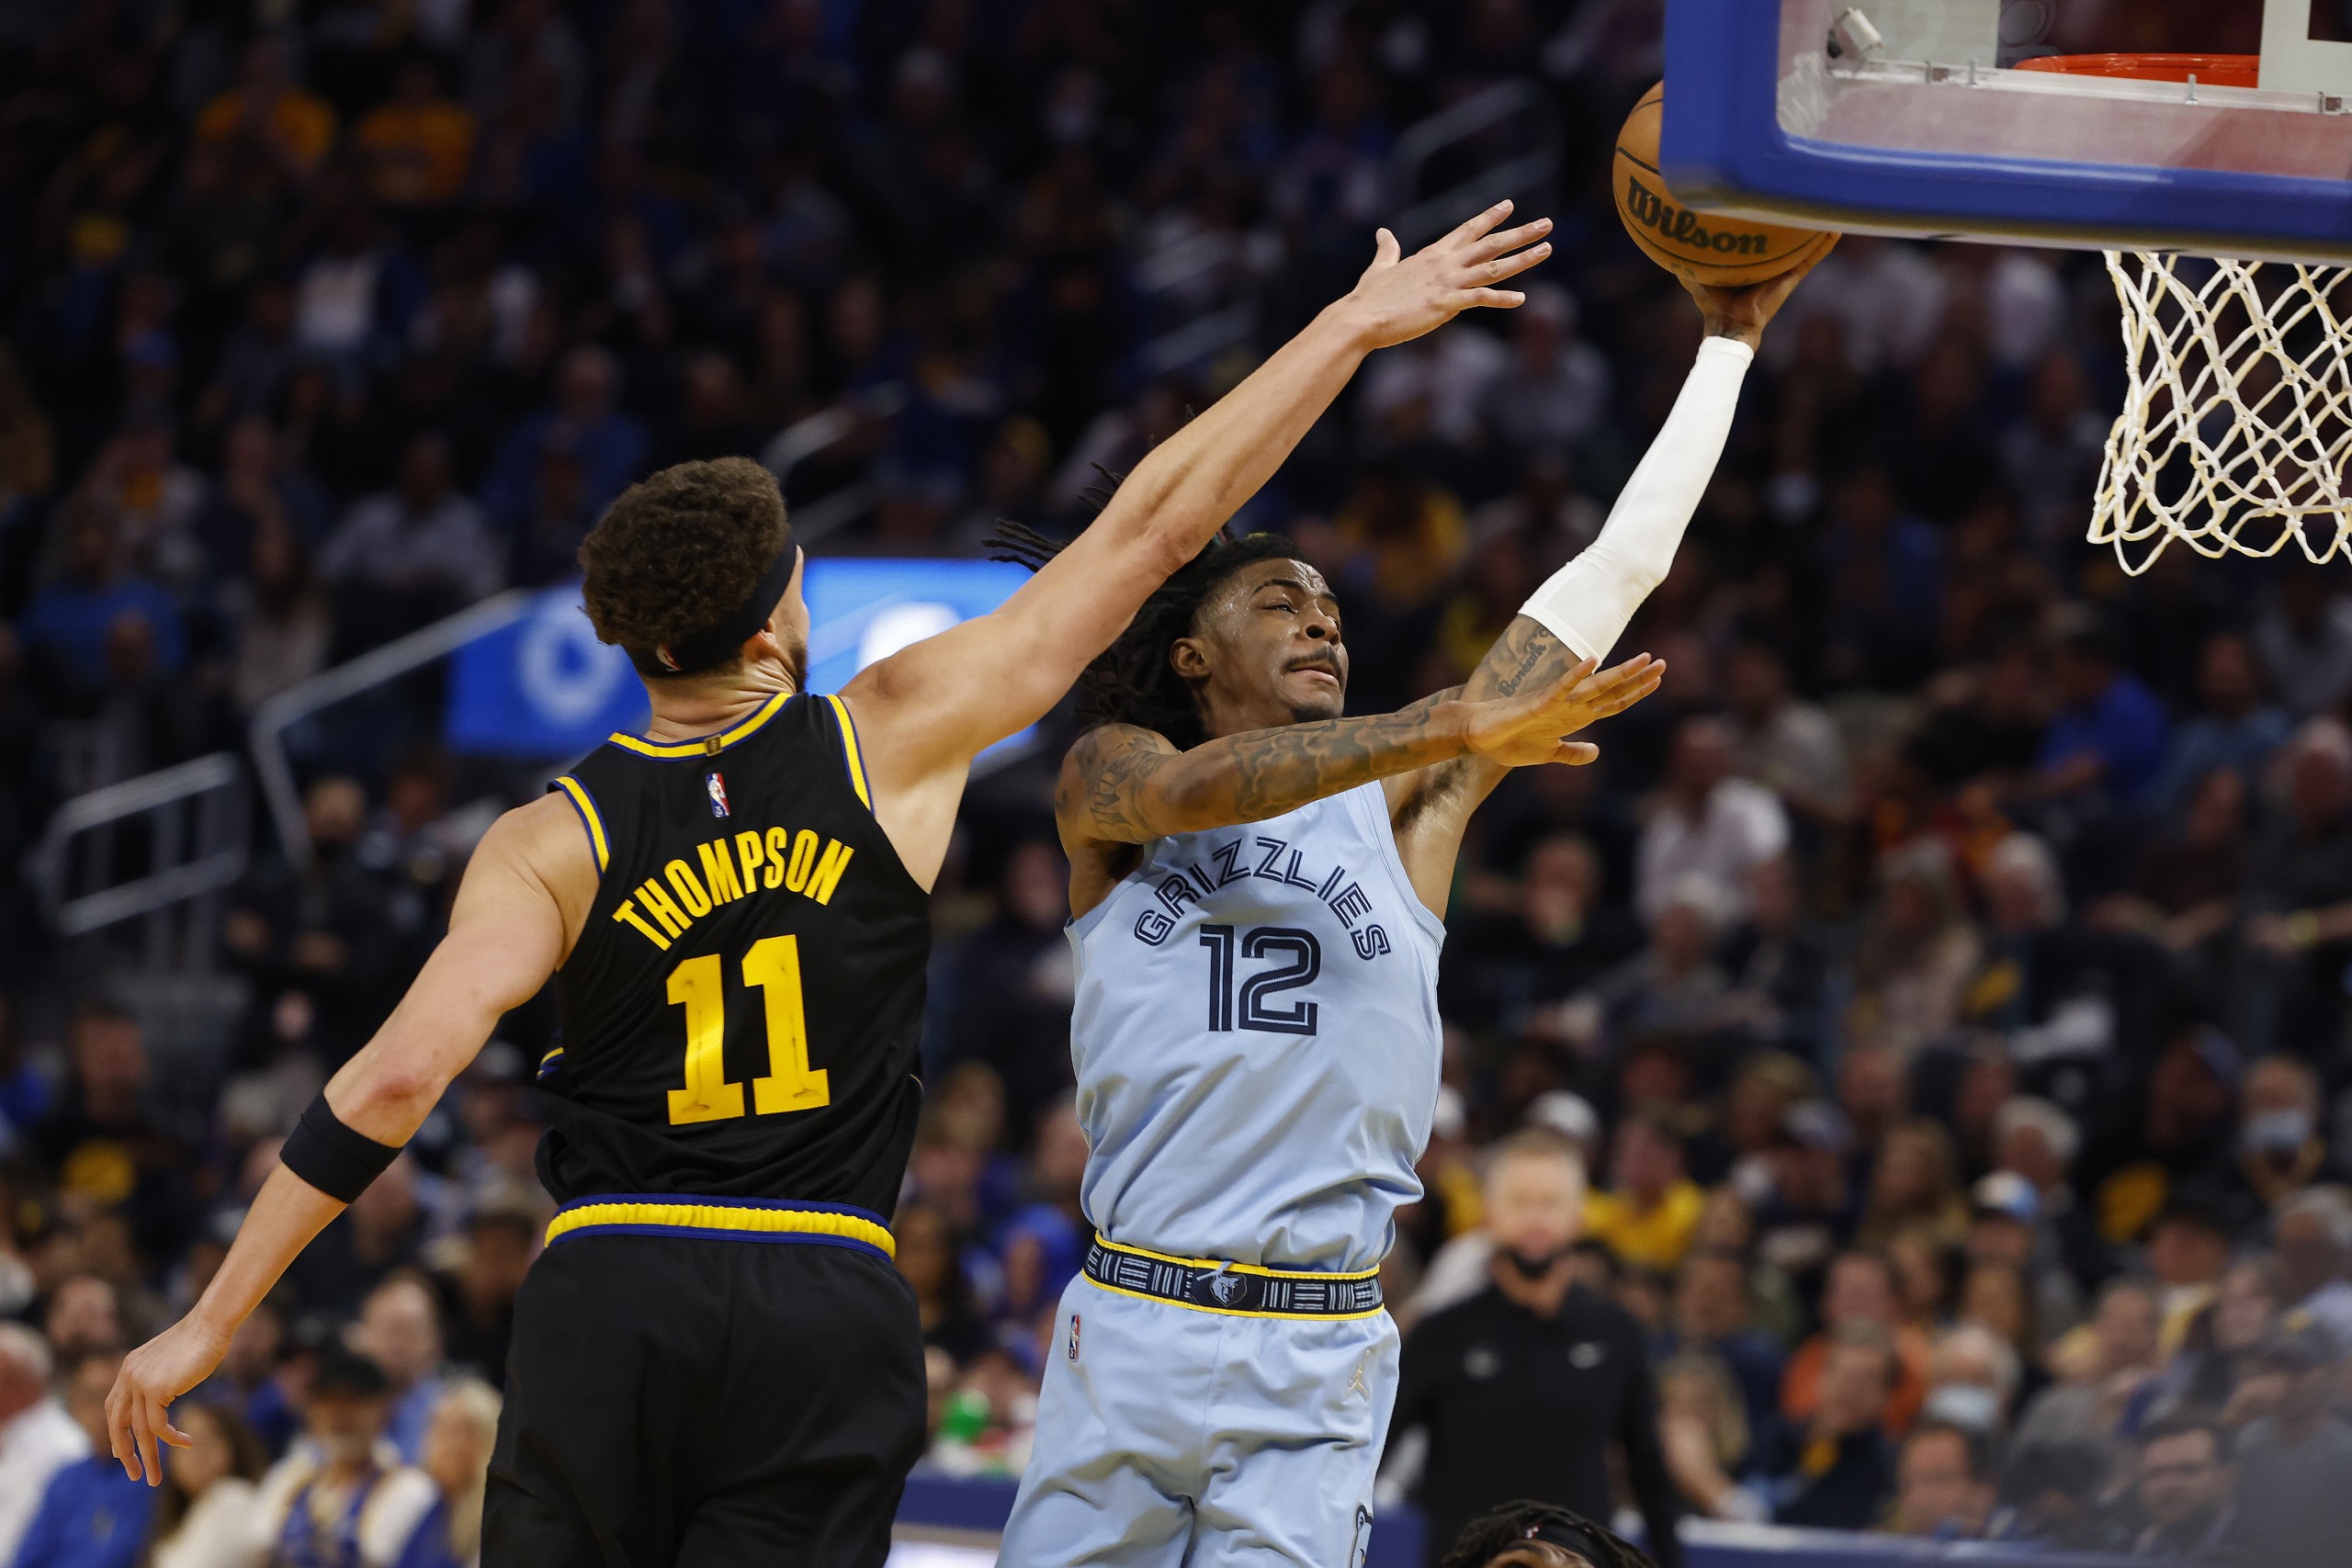 epa09933025 Memphis Grizzlies guard Ja Morant (R) goes to the basket for two points past Golden State Warriors guard Klay Thompson (L) during the second half of the NBA Western Conference semifinal playoff game three between the Golden State Warriors and the Memphis Grizzles at Chase Center, in San Francisco, California, USA, 07 May 2022.  EPA/JOHN G. MABANGLO  SHUTTERSTOCK OUT